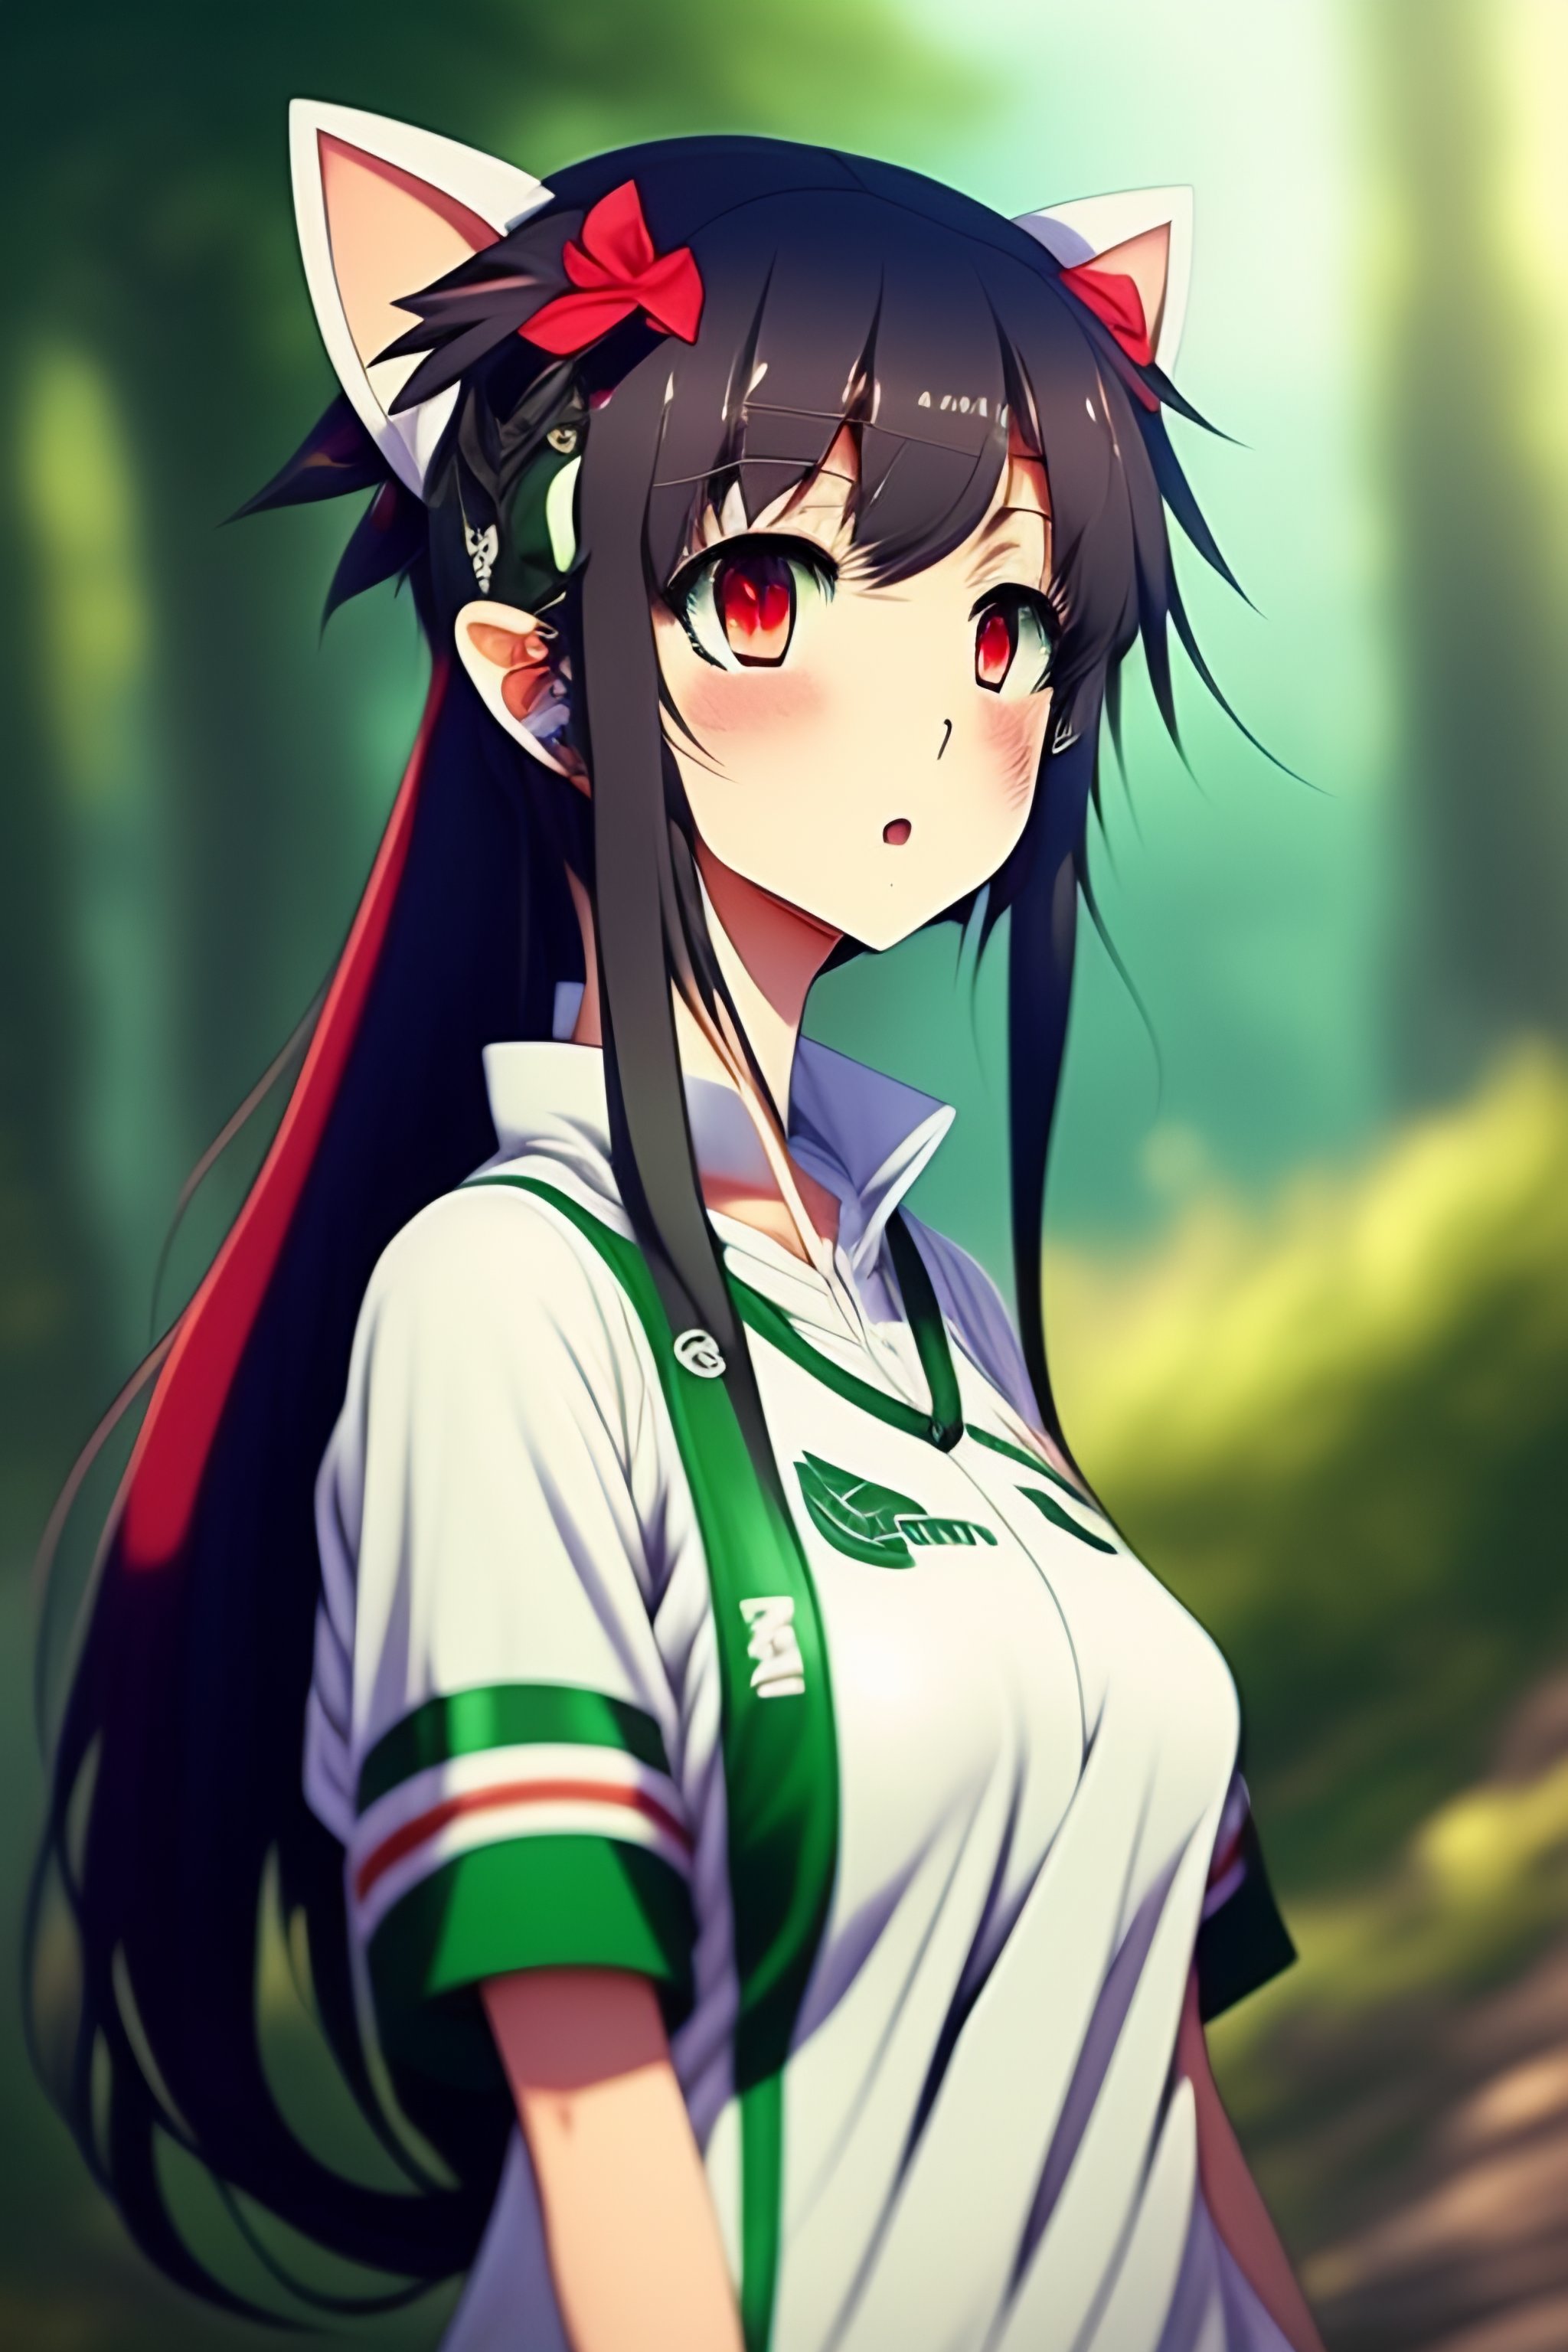 anime girl with black hair and cat ears